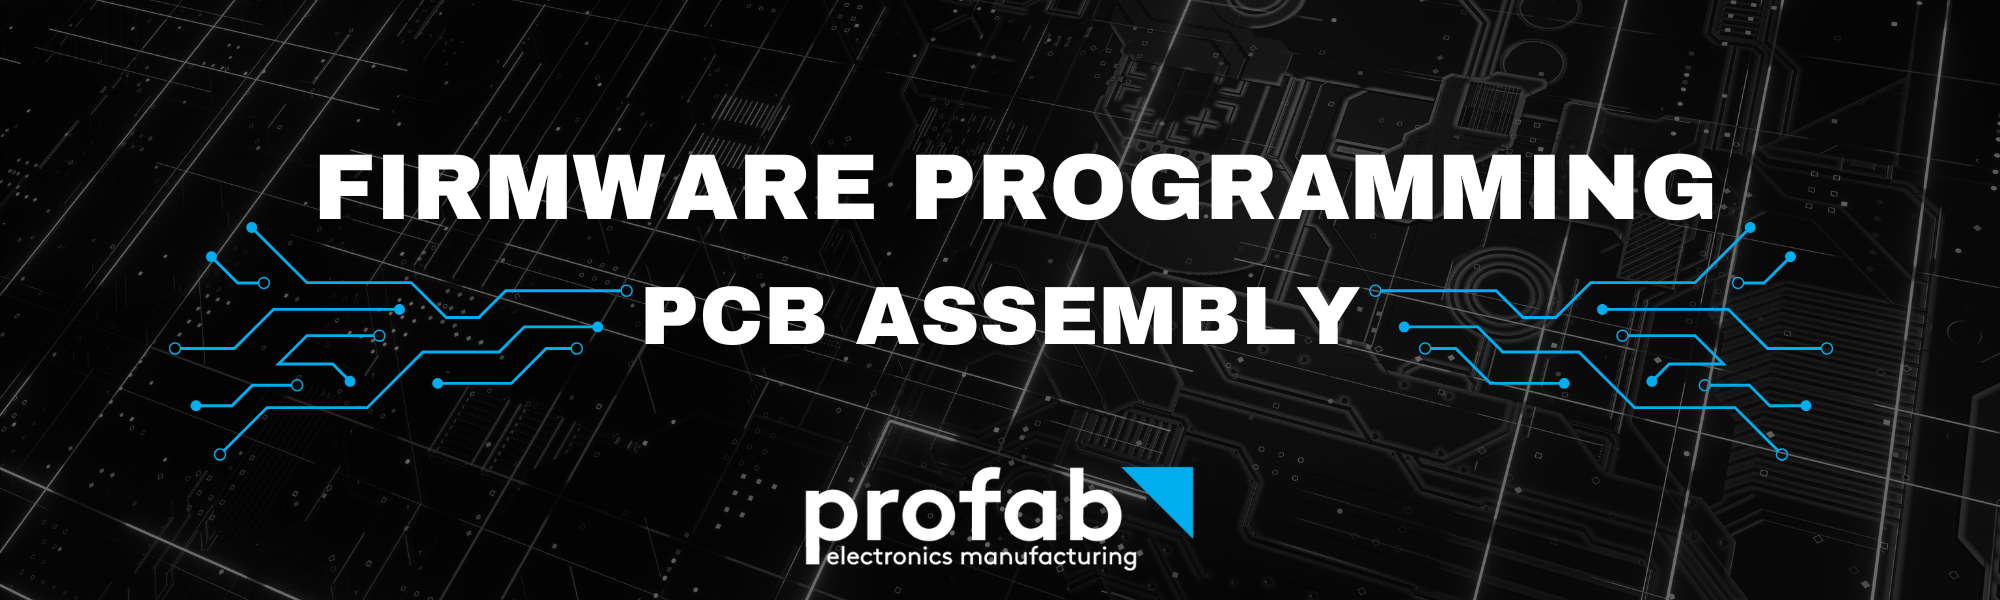 PCB Assembly Firmware Programming